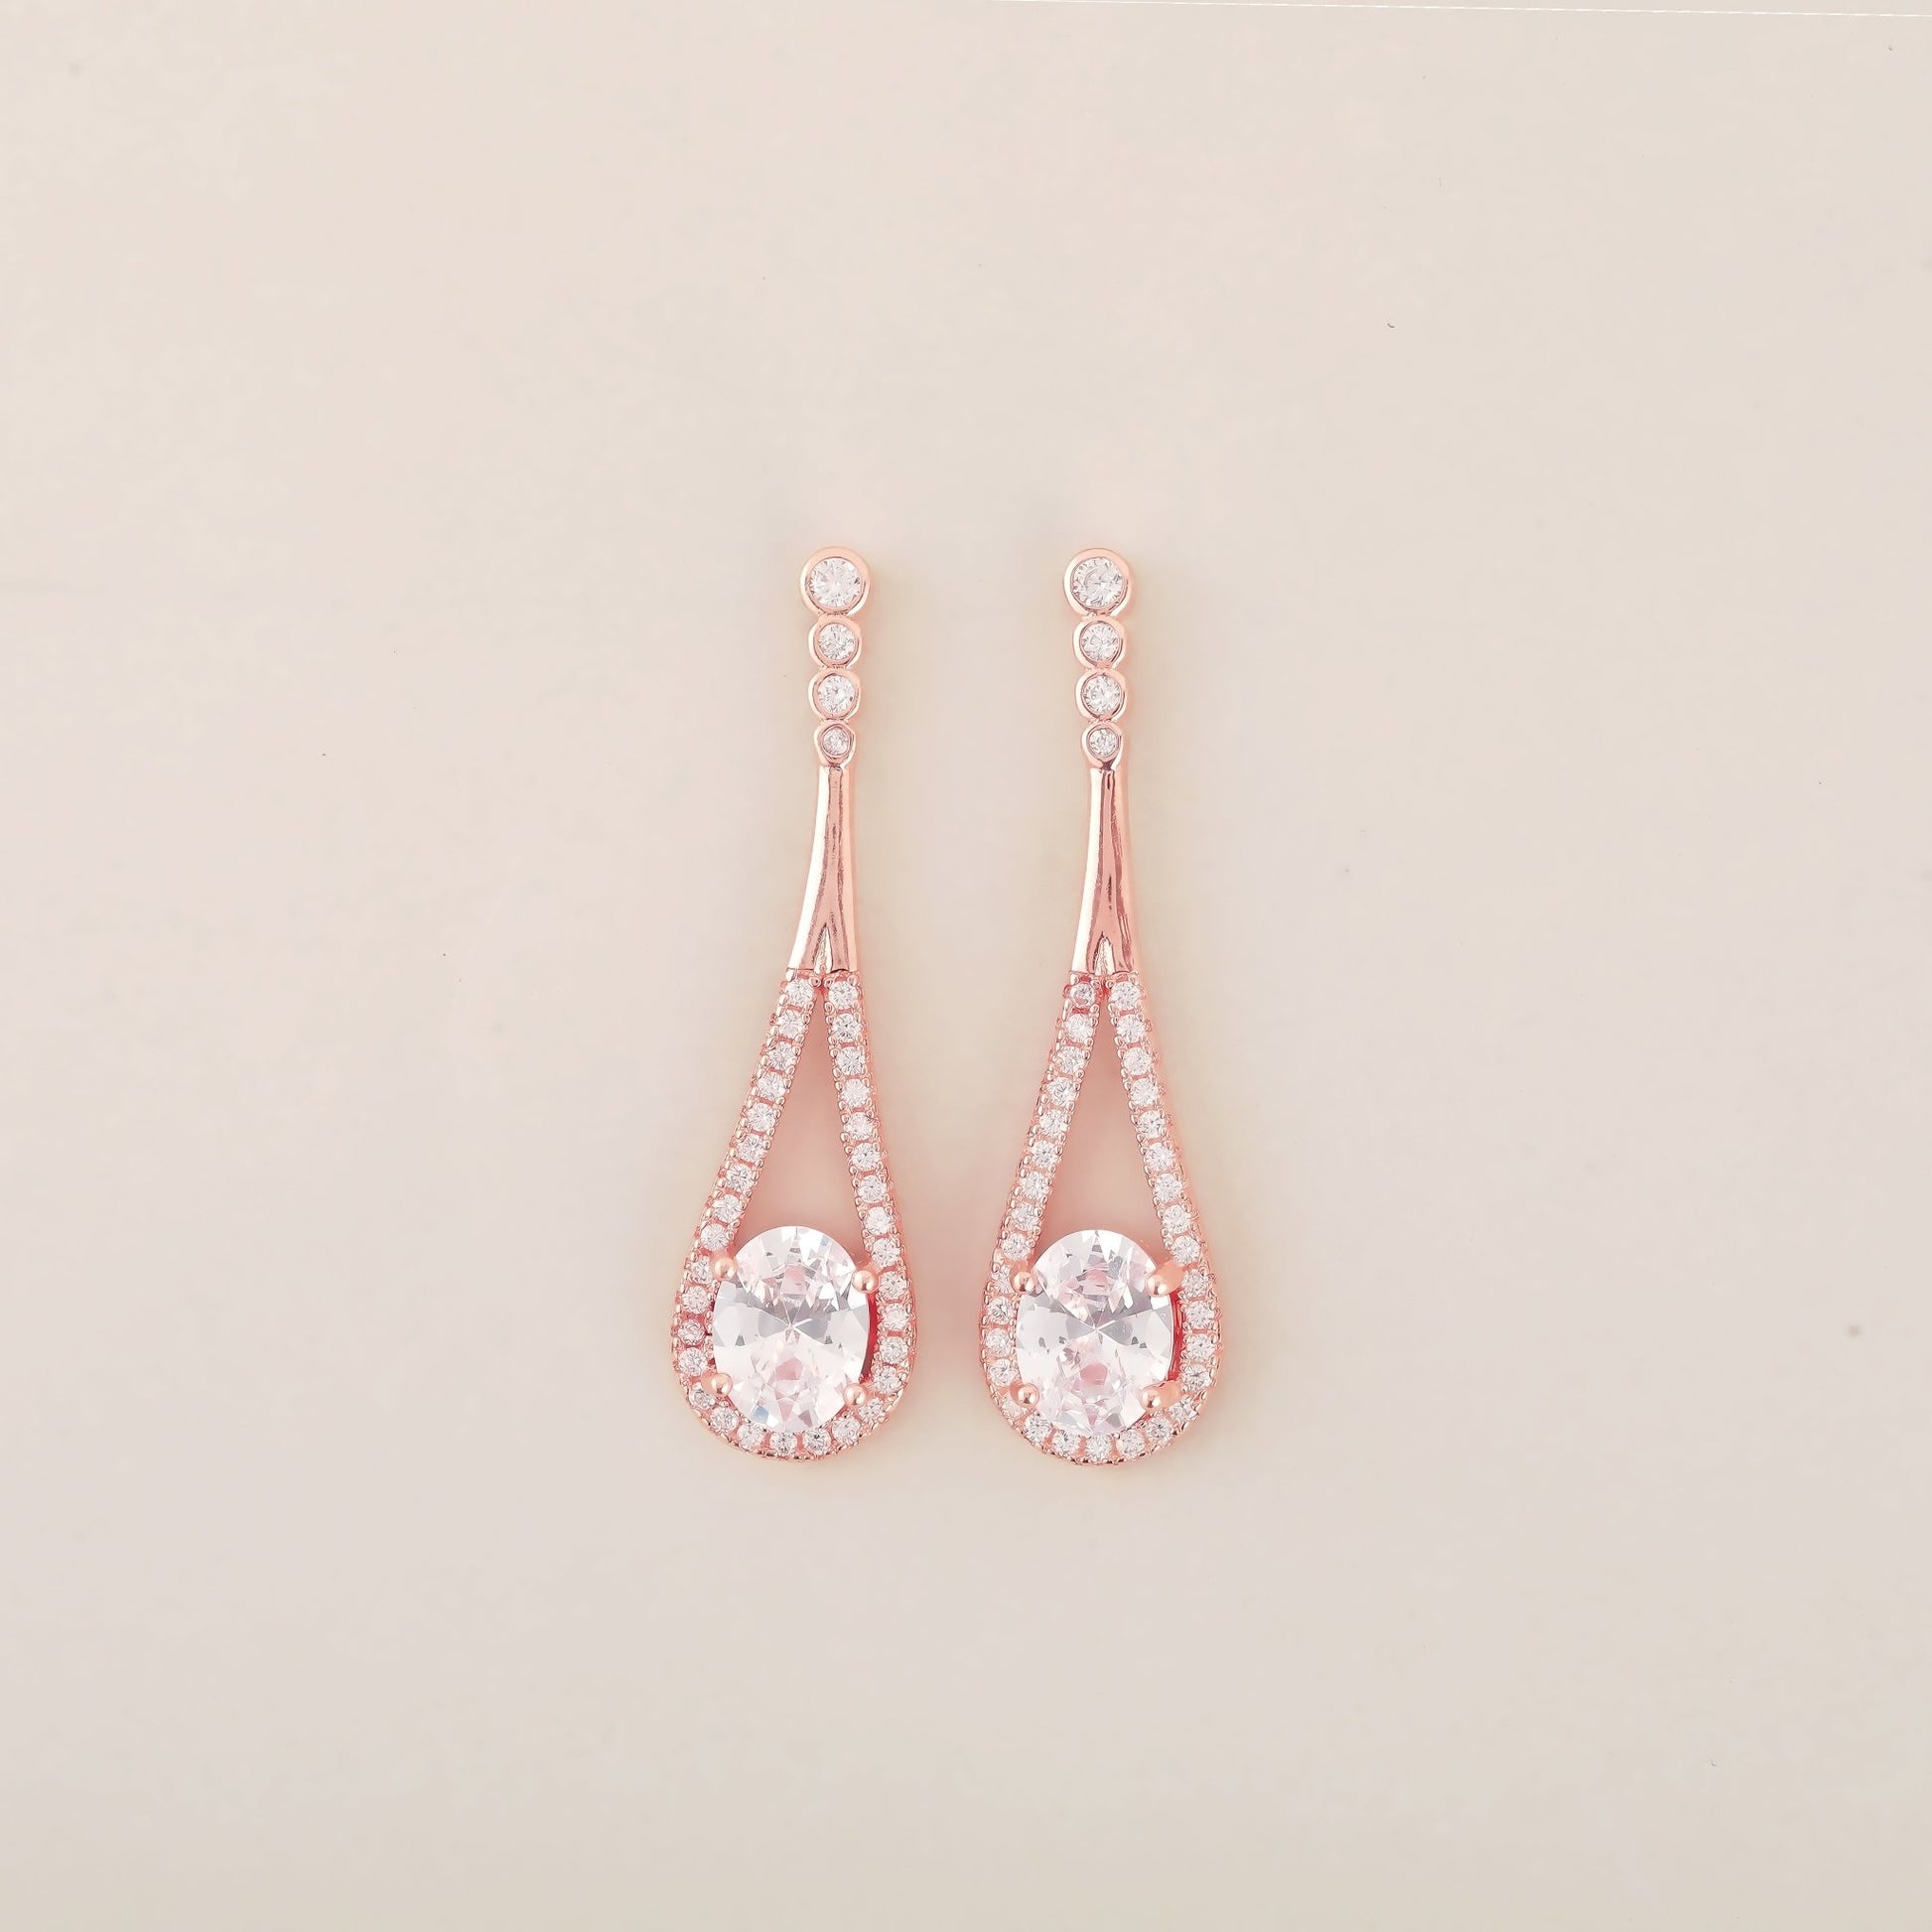 Rosegold Solitare Earrings - Shining Silver.in